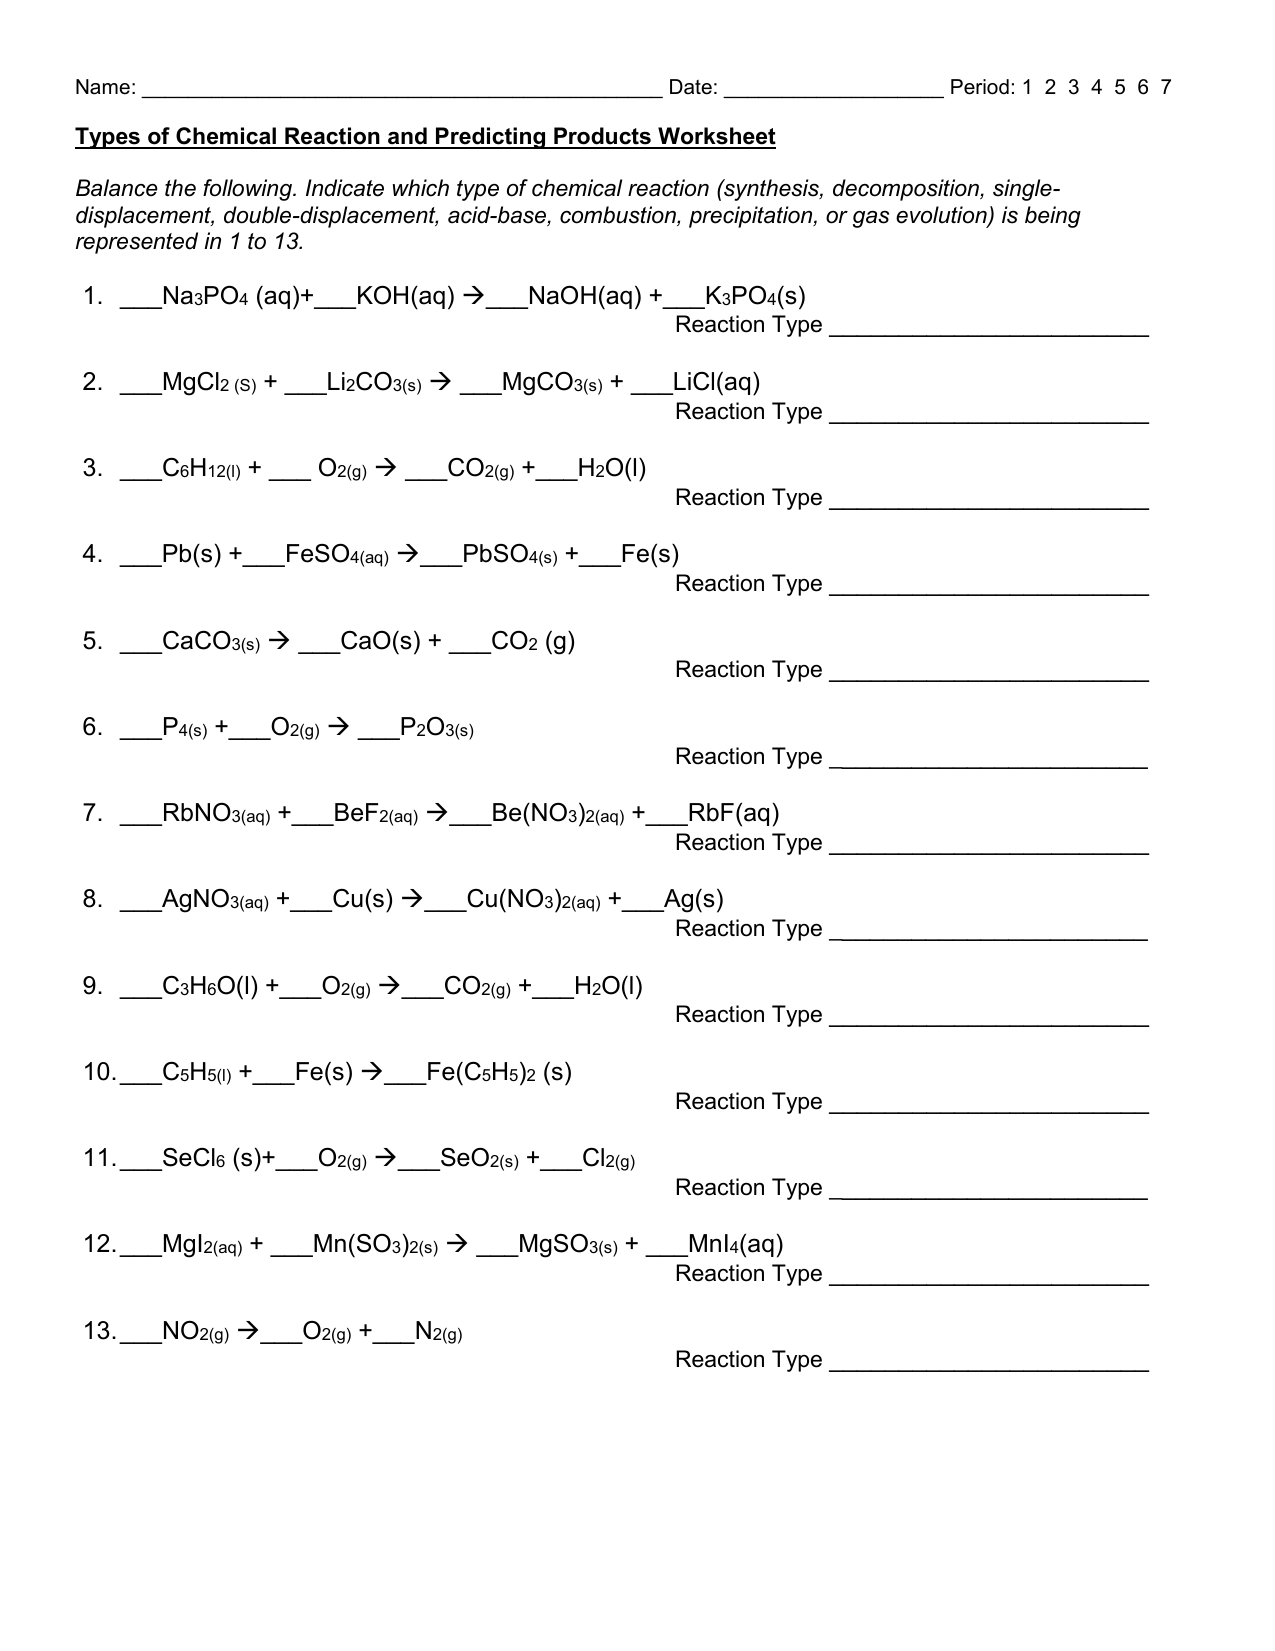 Types of Chemical Reaction and Predicting Products Worksheet Inside Chemical Reaction Type Worksheet